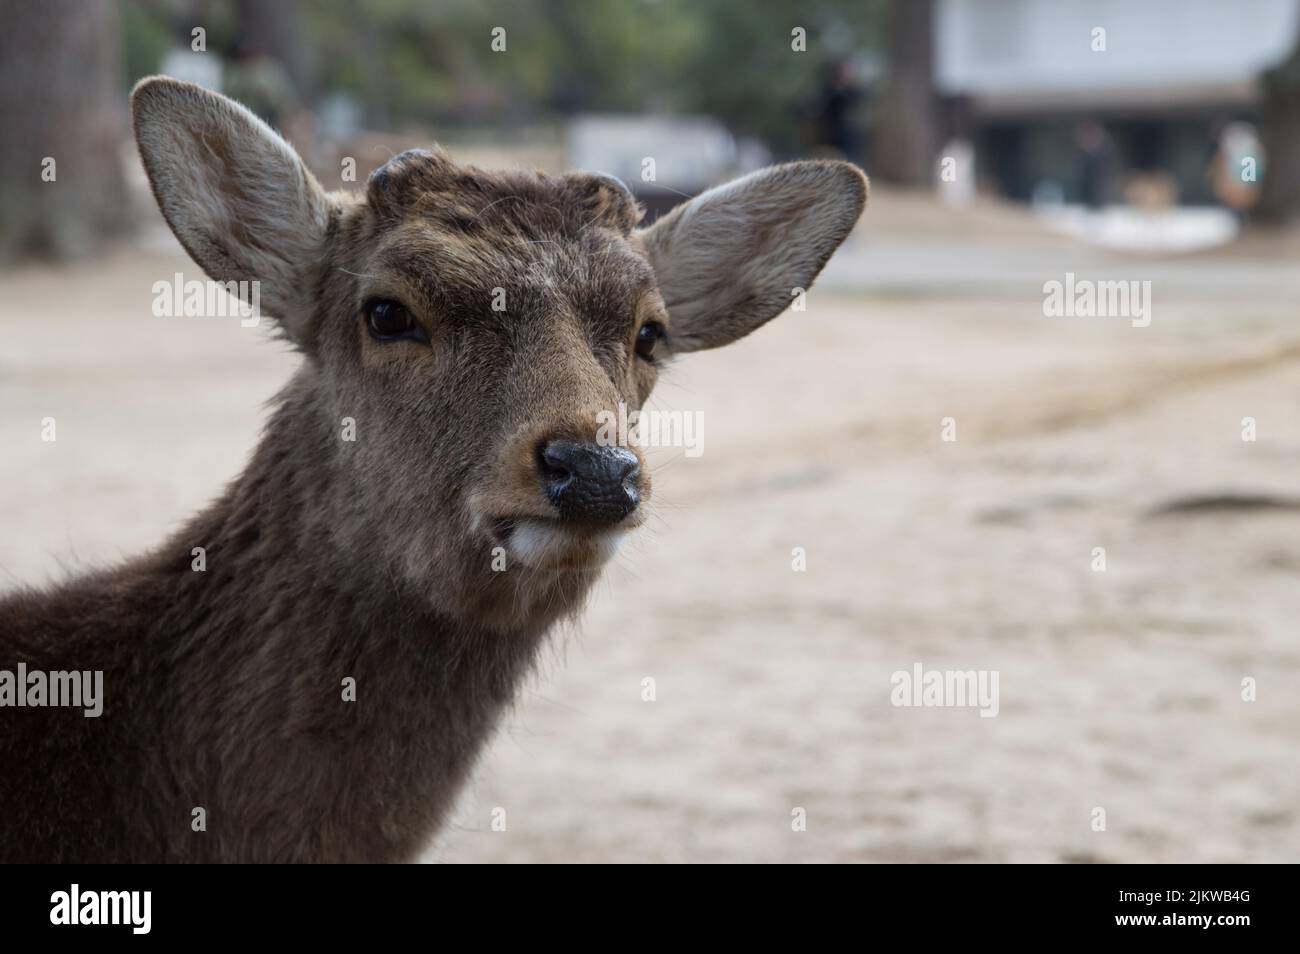 A closeup of a deer's face on a blurred background Stock Photo